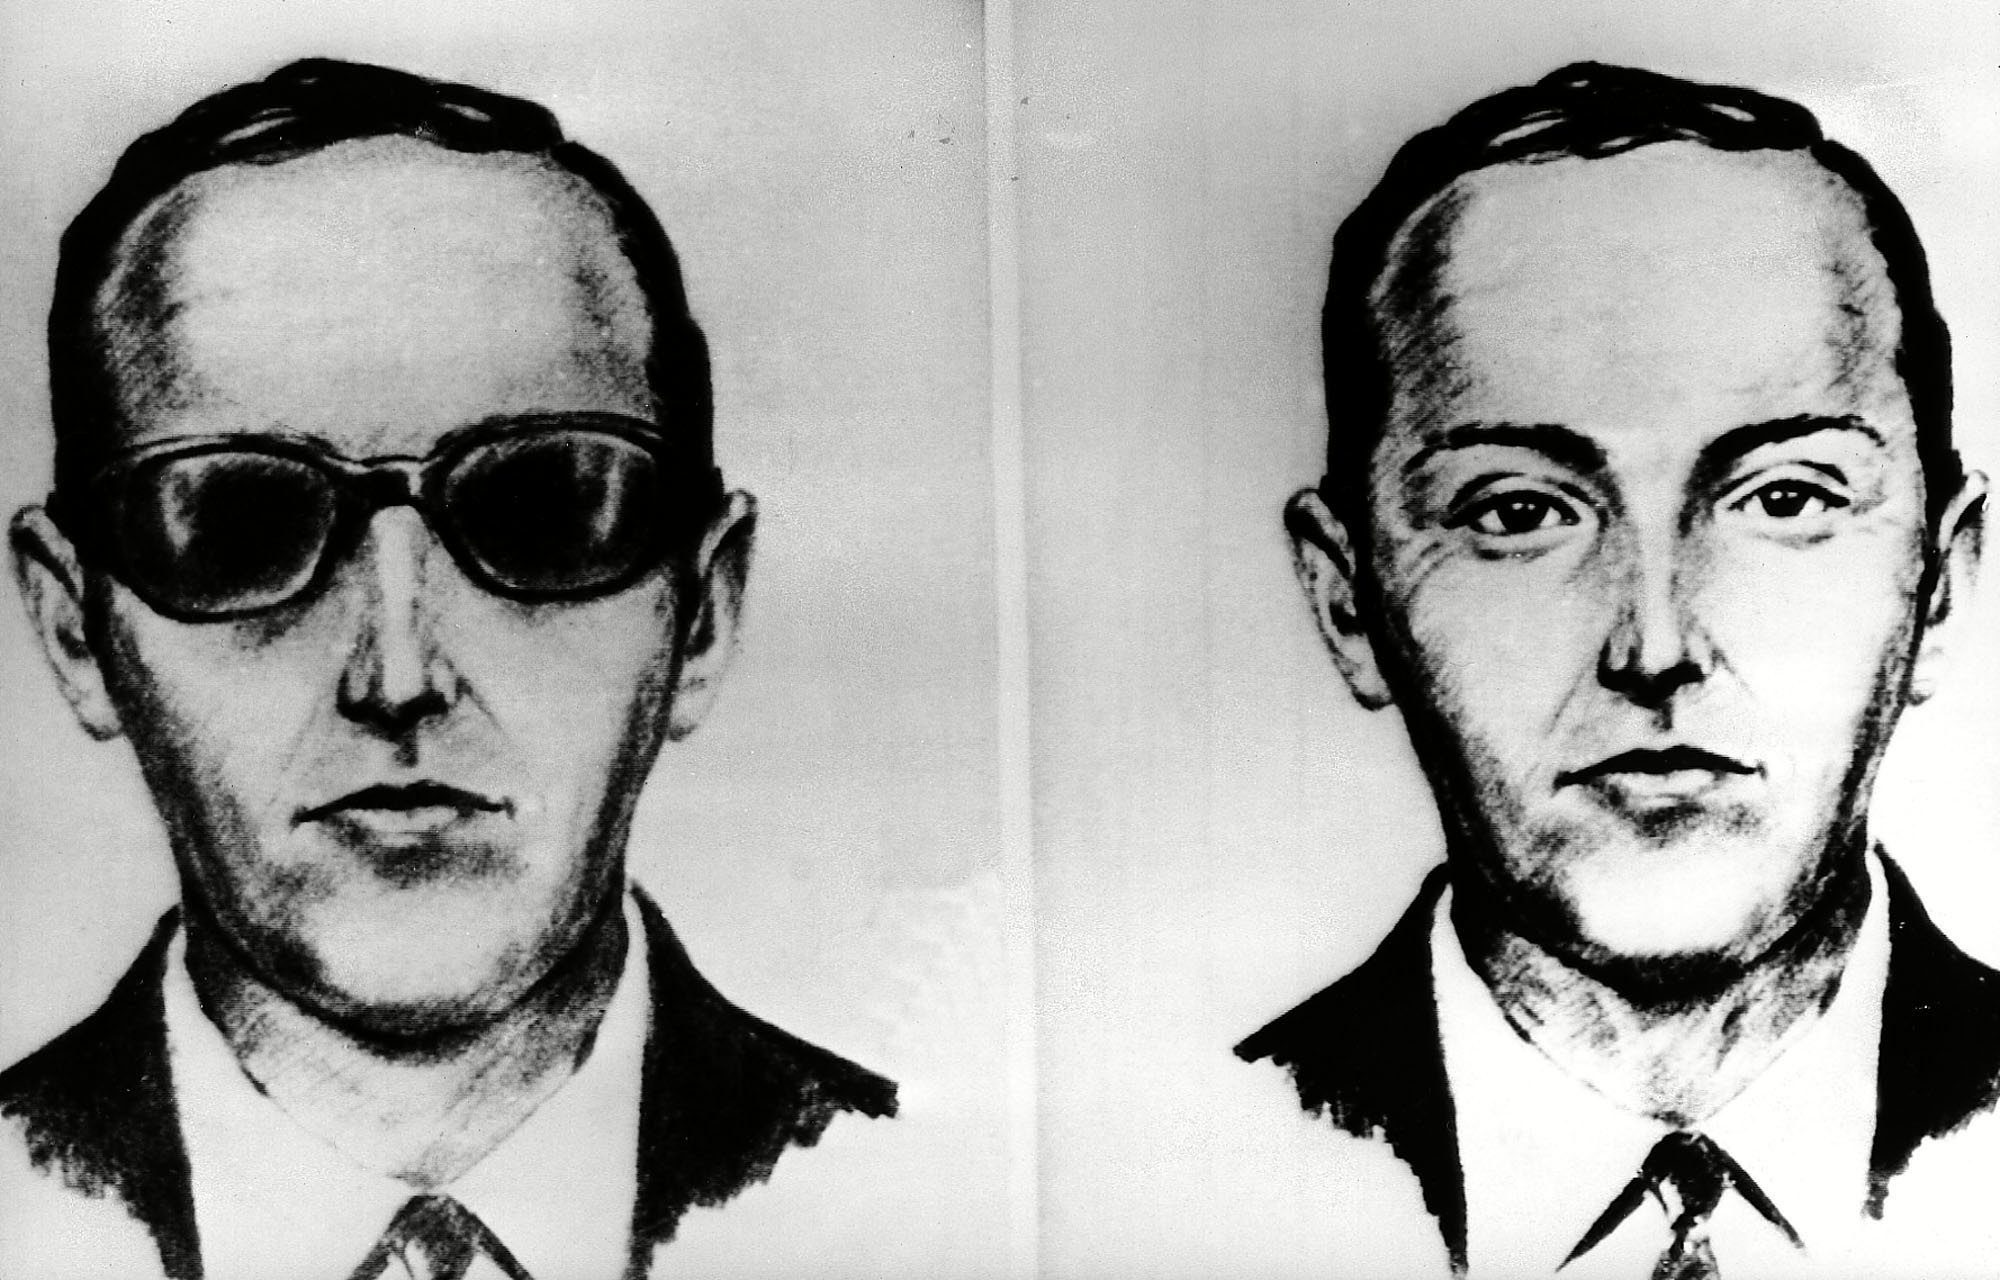 This undated artist' sketch shows the skyjacker known as D.B. Cooper from recollections of the passengers and crew of a Northwest Airlines jet he hijacked between Portland and Seattle on Thanksgiving eve in 1971. The FBI says it's no longer actively investigating the unsolved mystery of D.B. Cooper. The bureau announced it's "exhaustively reviewed all credible leads" during its 45-year investigation DB Cooper FBI - 12 Jul 2016